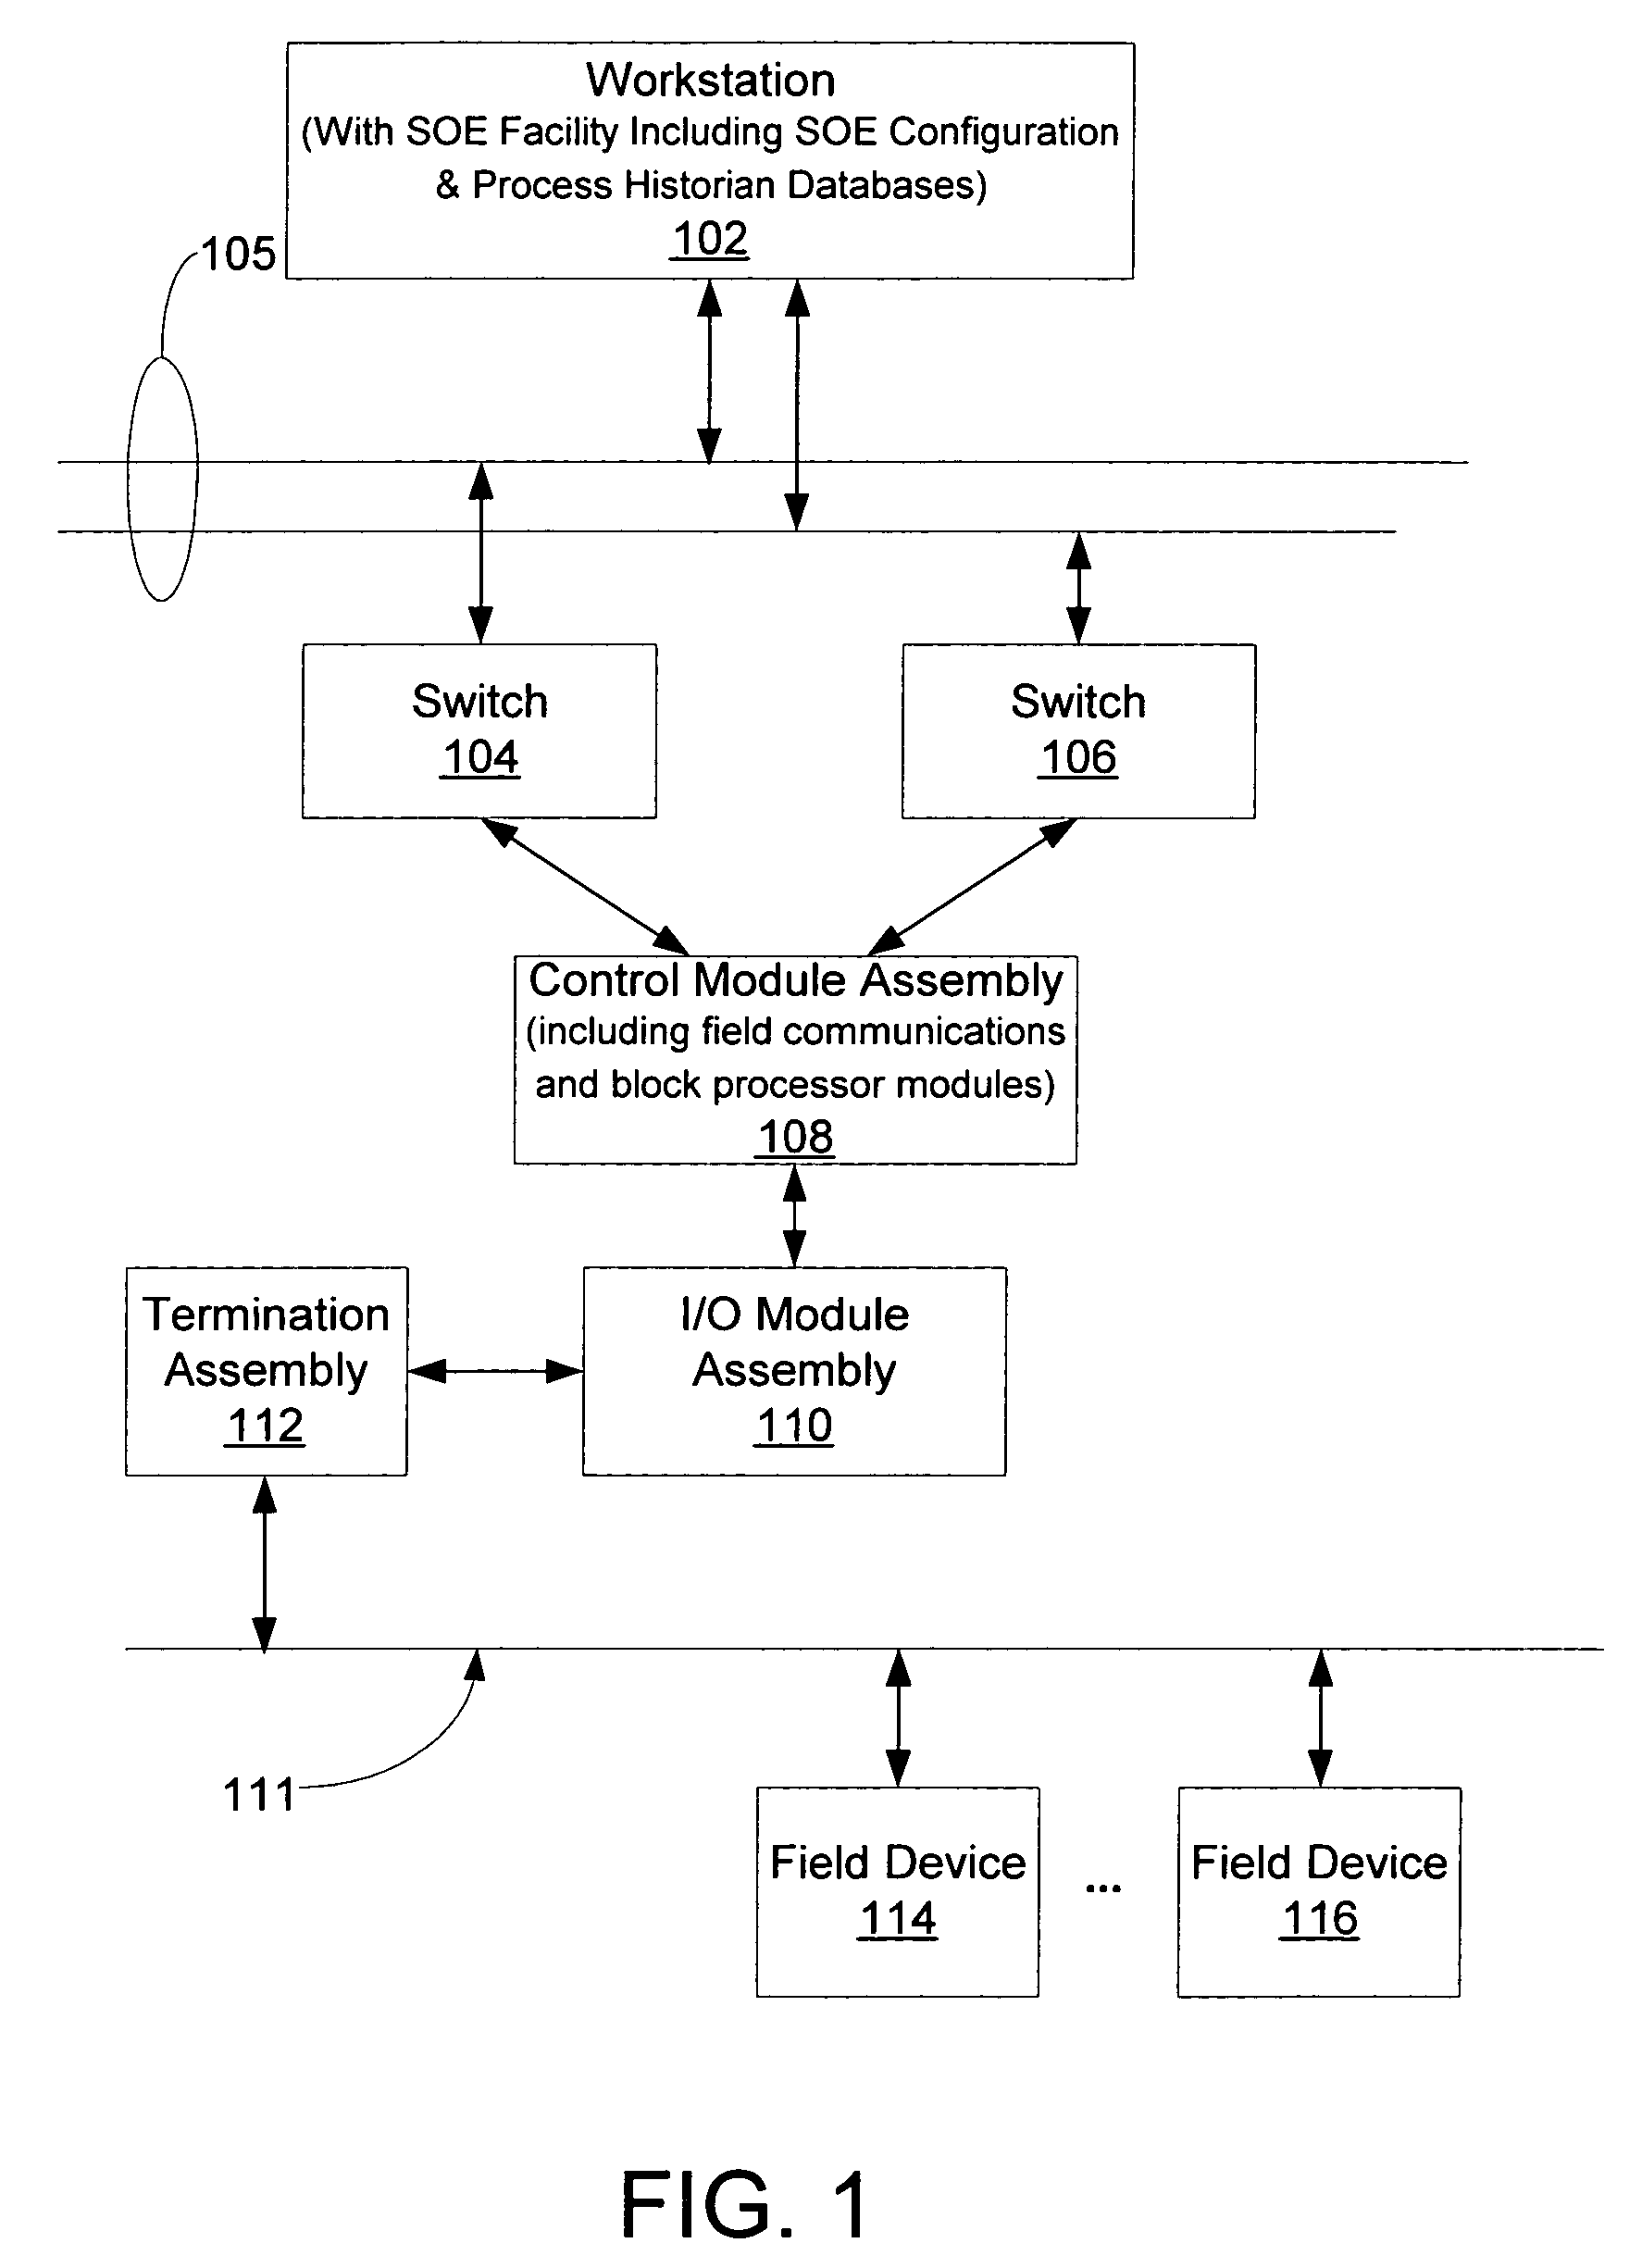 Sequence of events recorder facility for an industrial process control environment